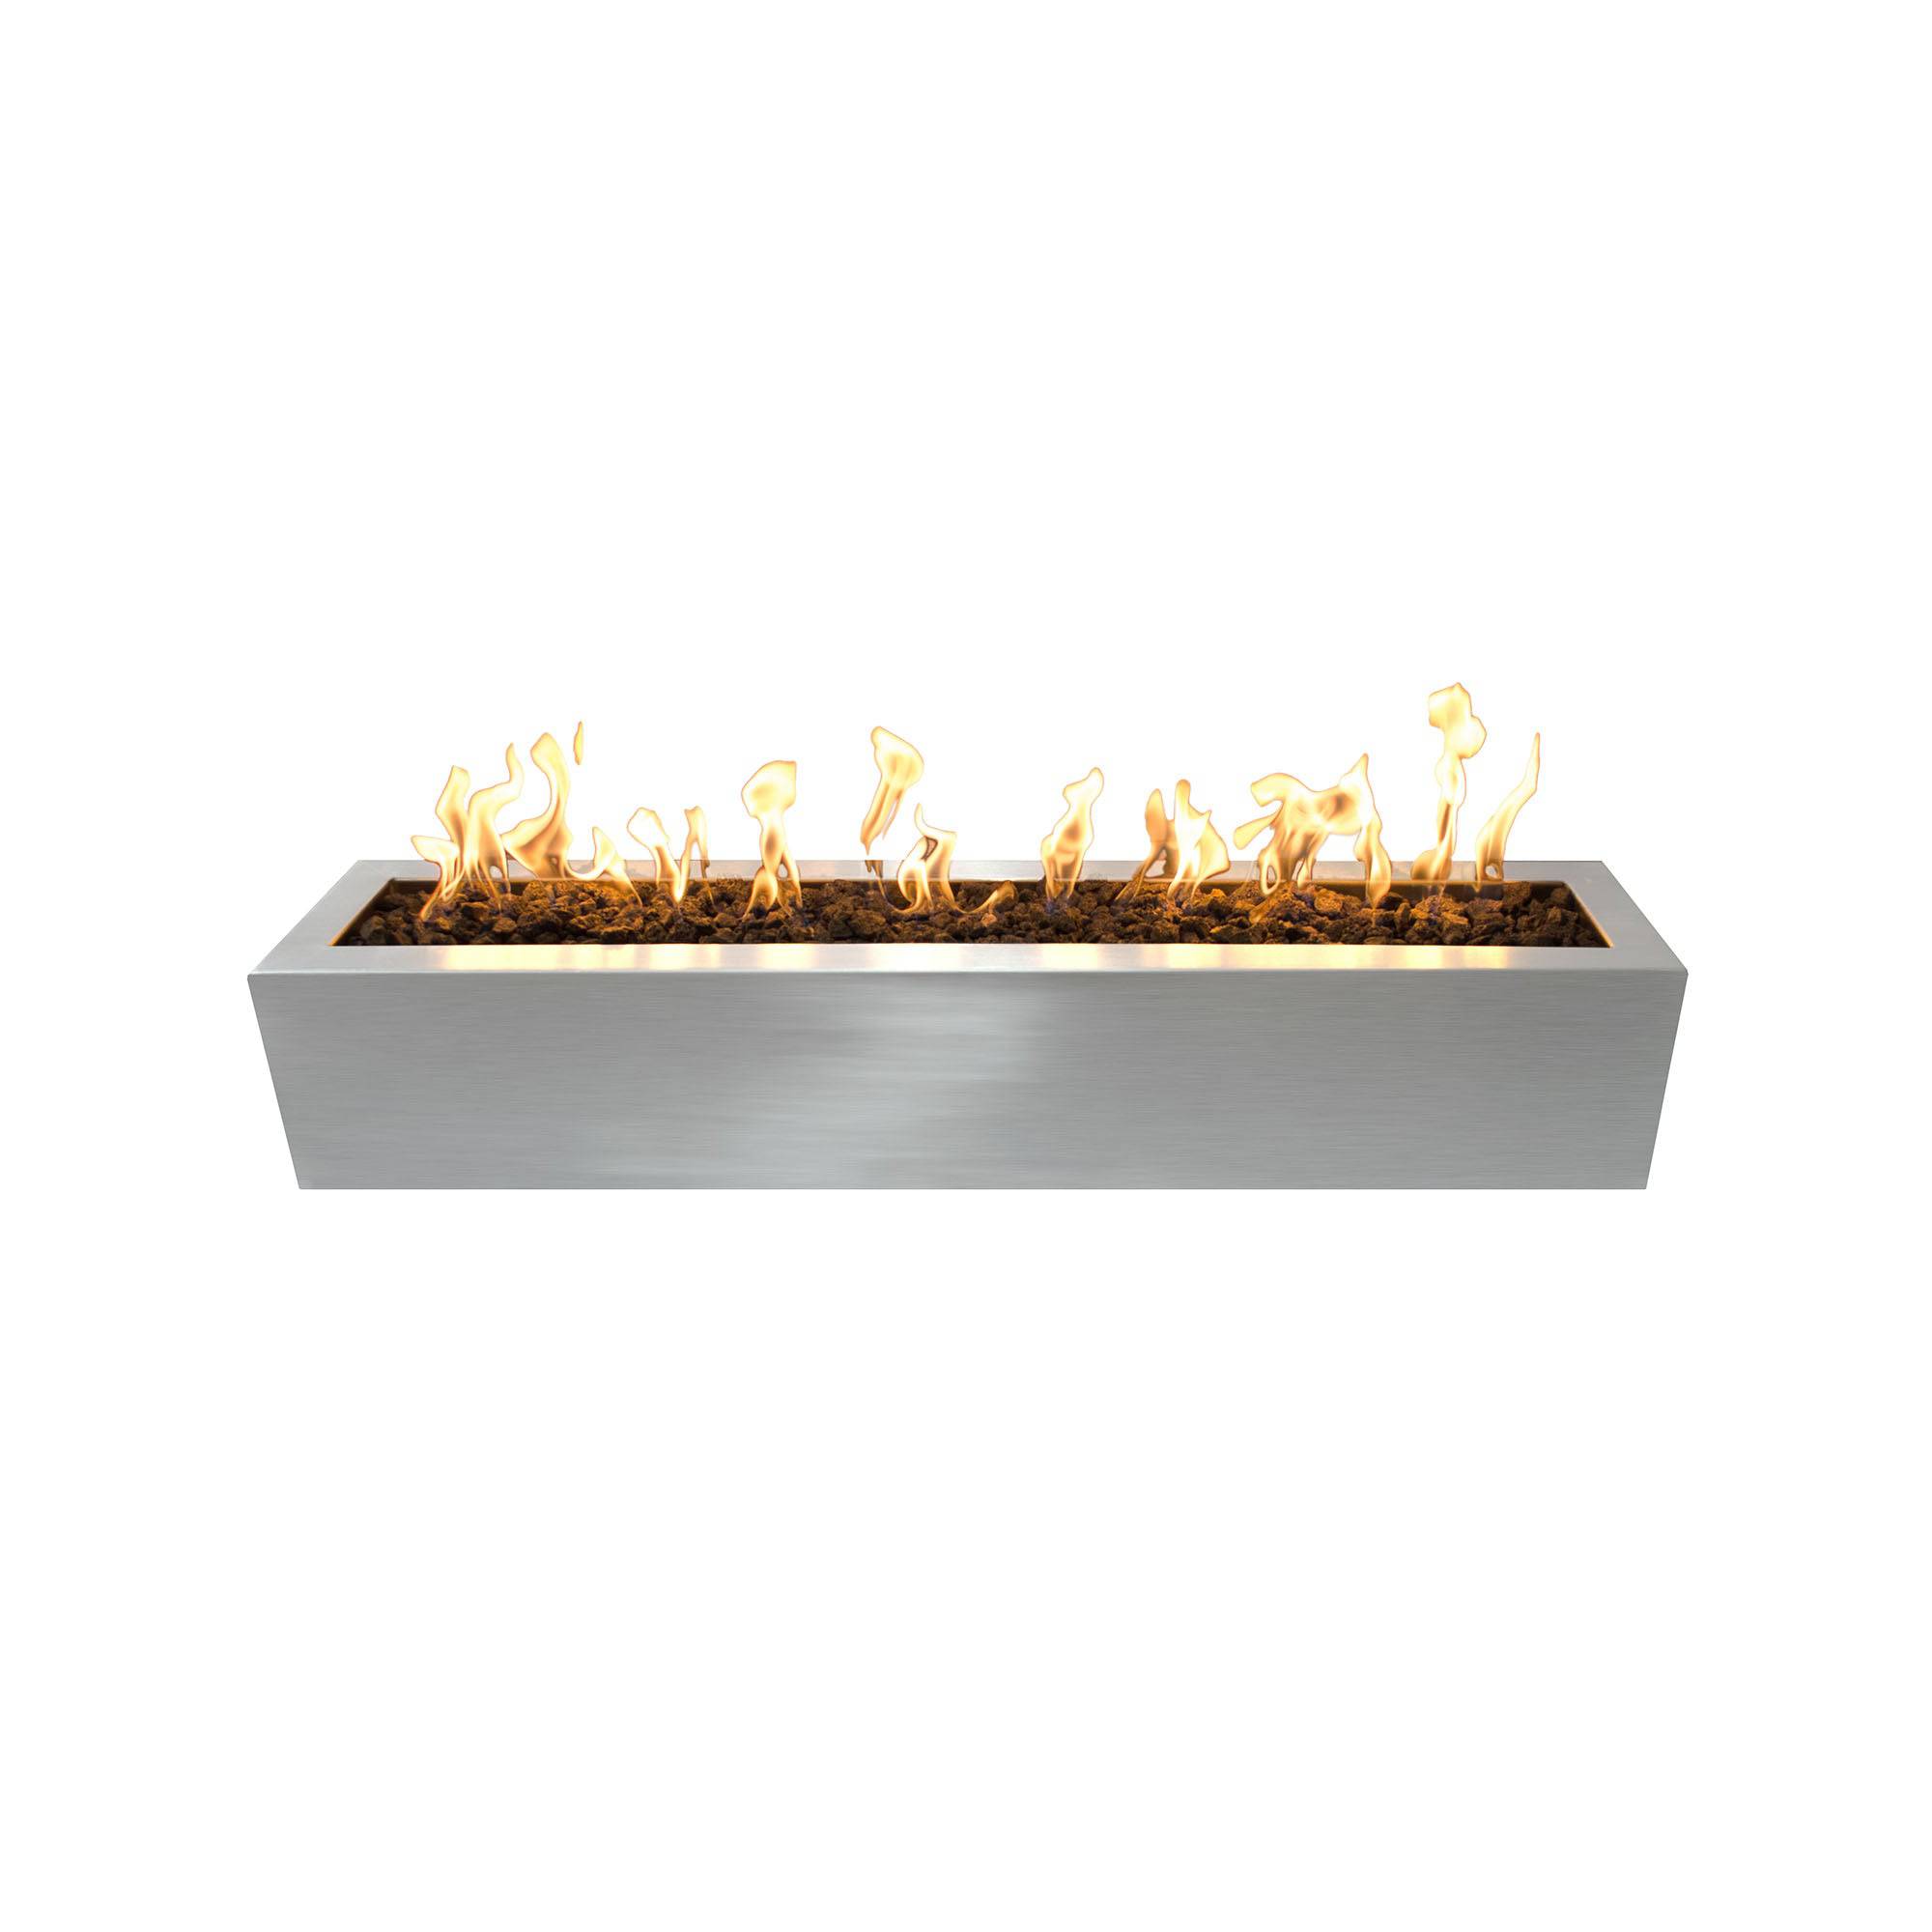 The Outdoor Plus Eaves Fire Pit Stainless Steel OPT-LBTSSXX - Serenity Provision